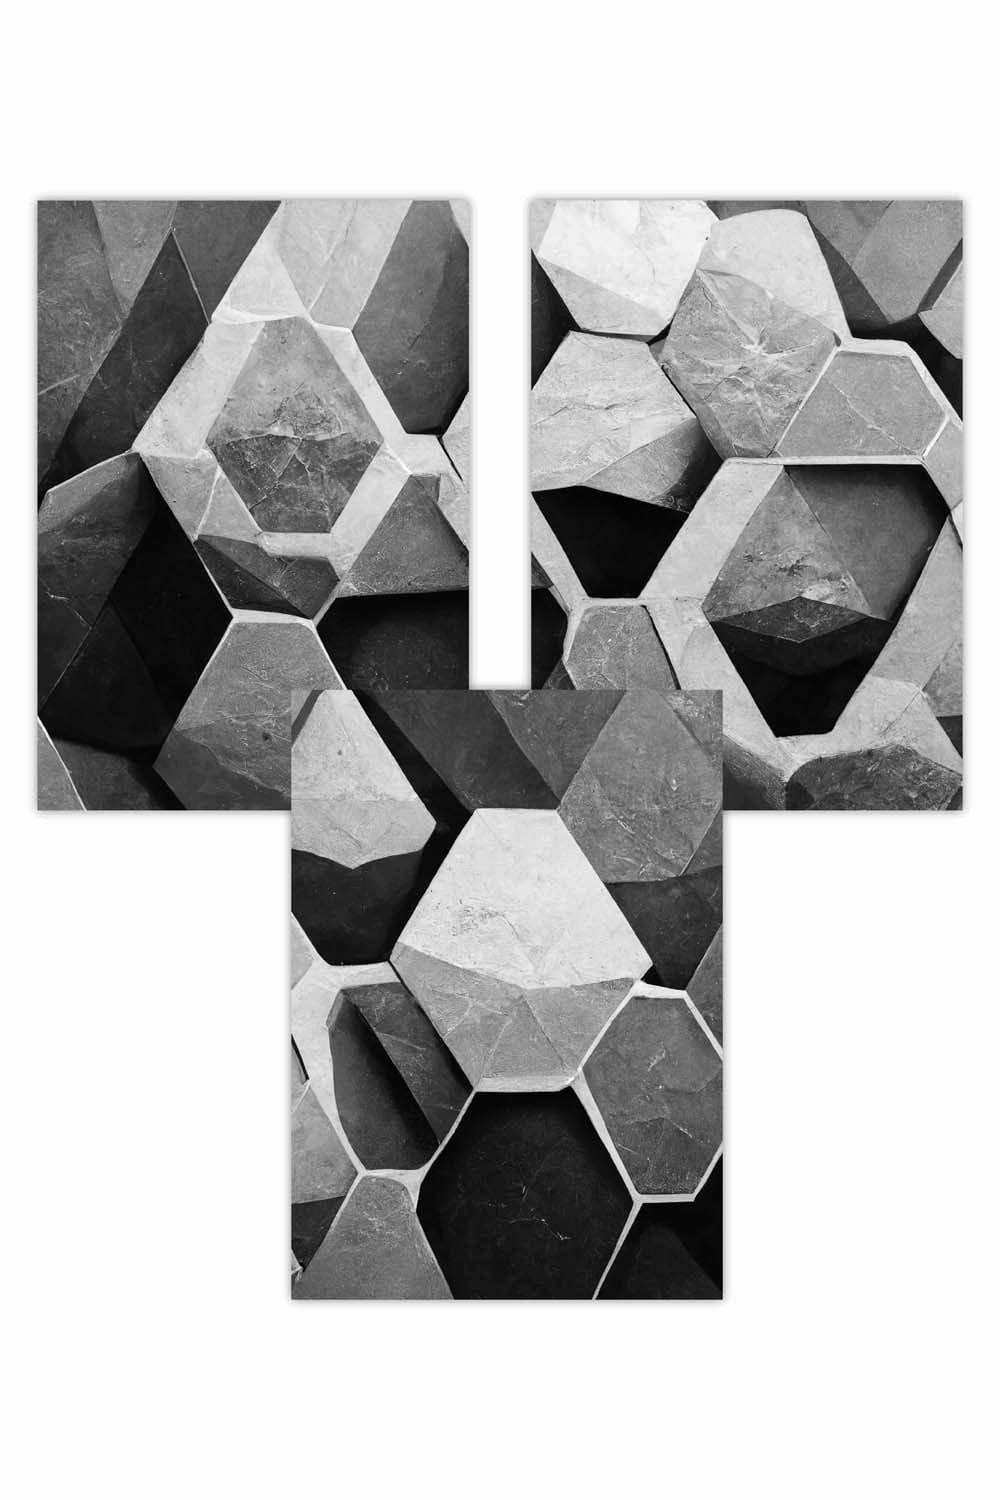 Set of 3 Geometric Abstract Black and Grey Hexagons Art Posters